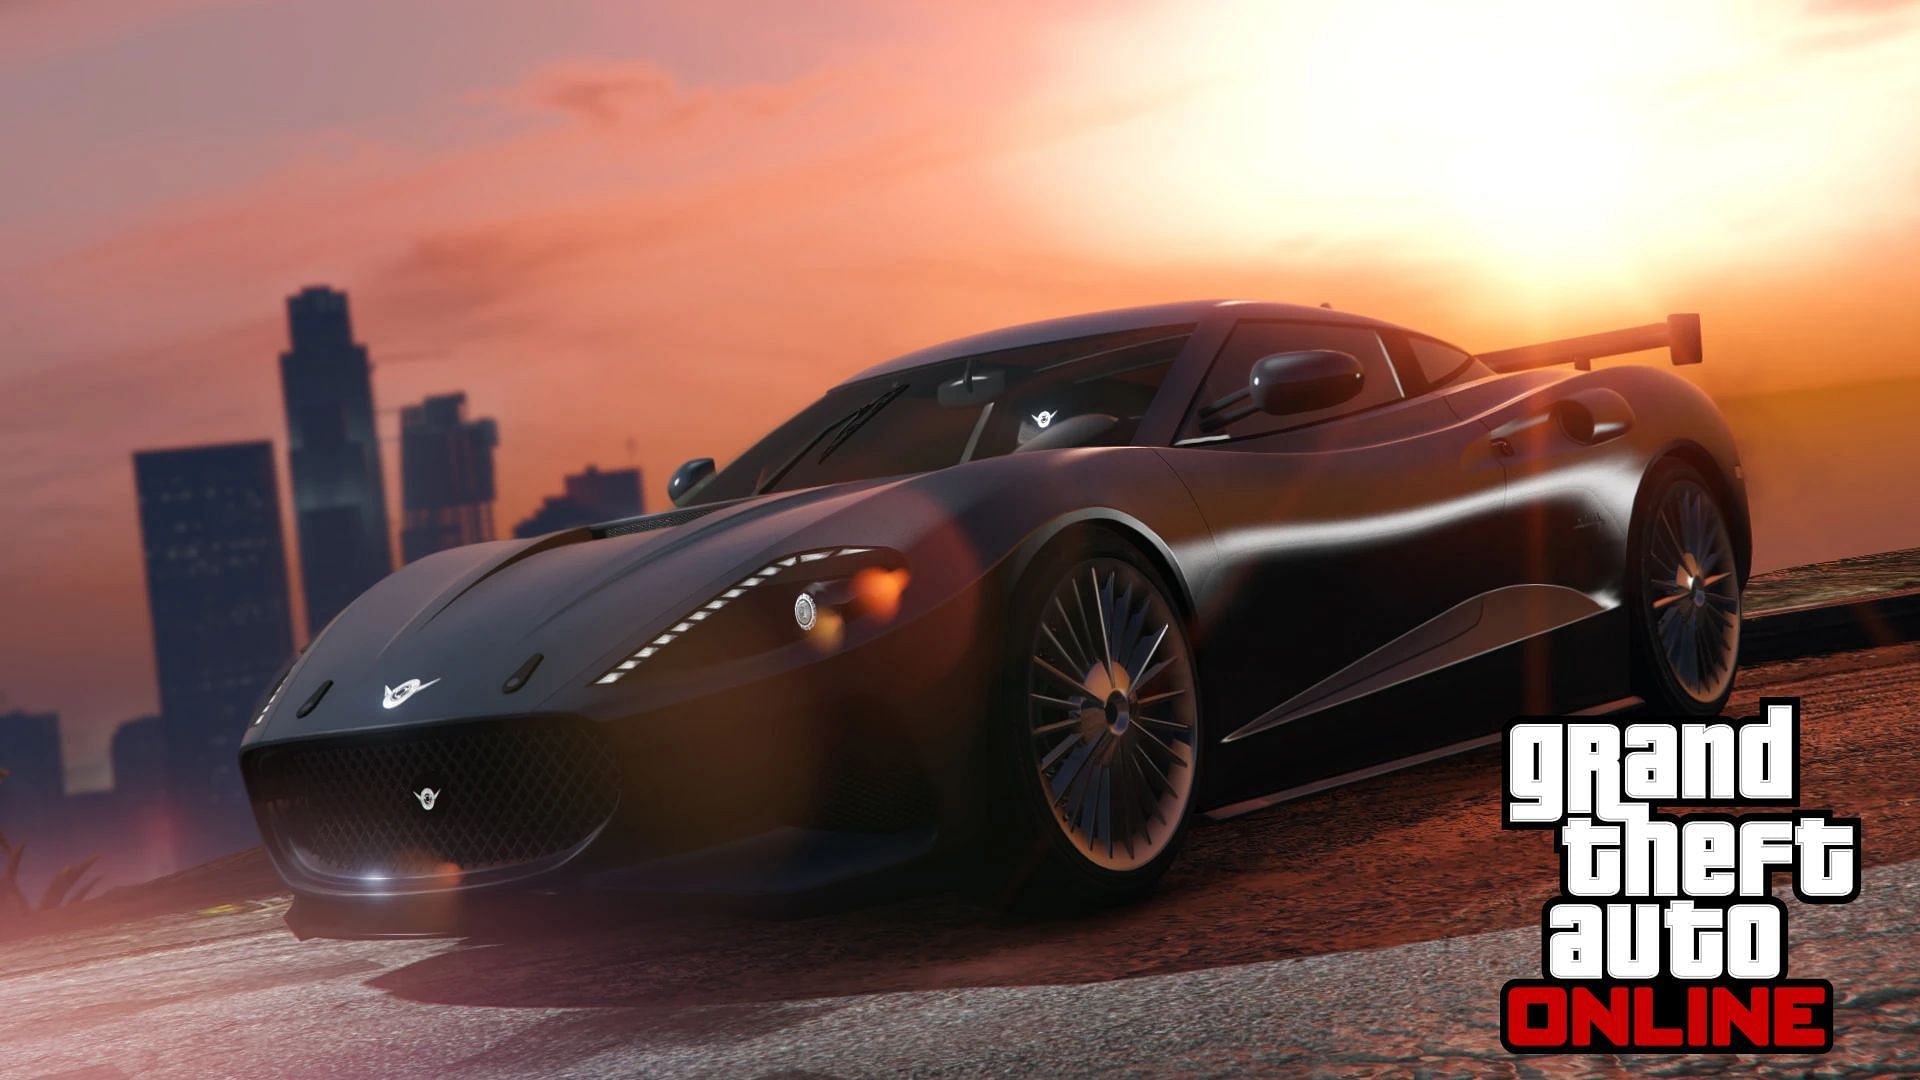 An official screenshot showing off this car with the game